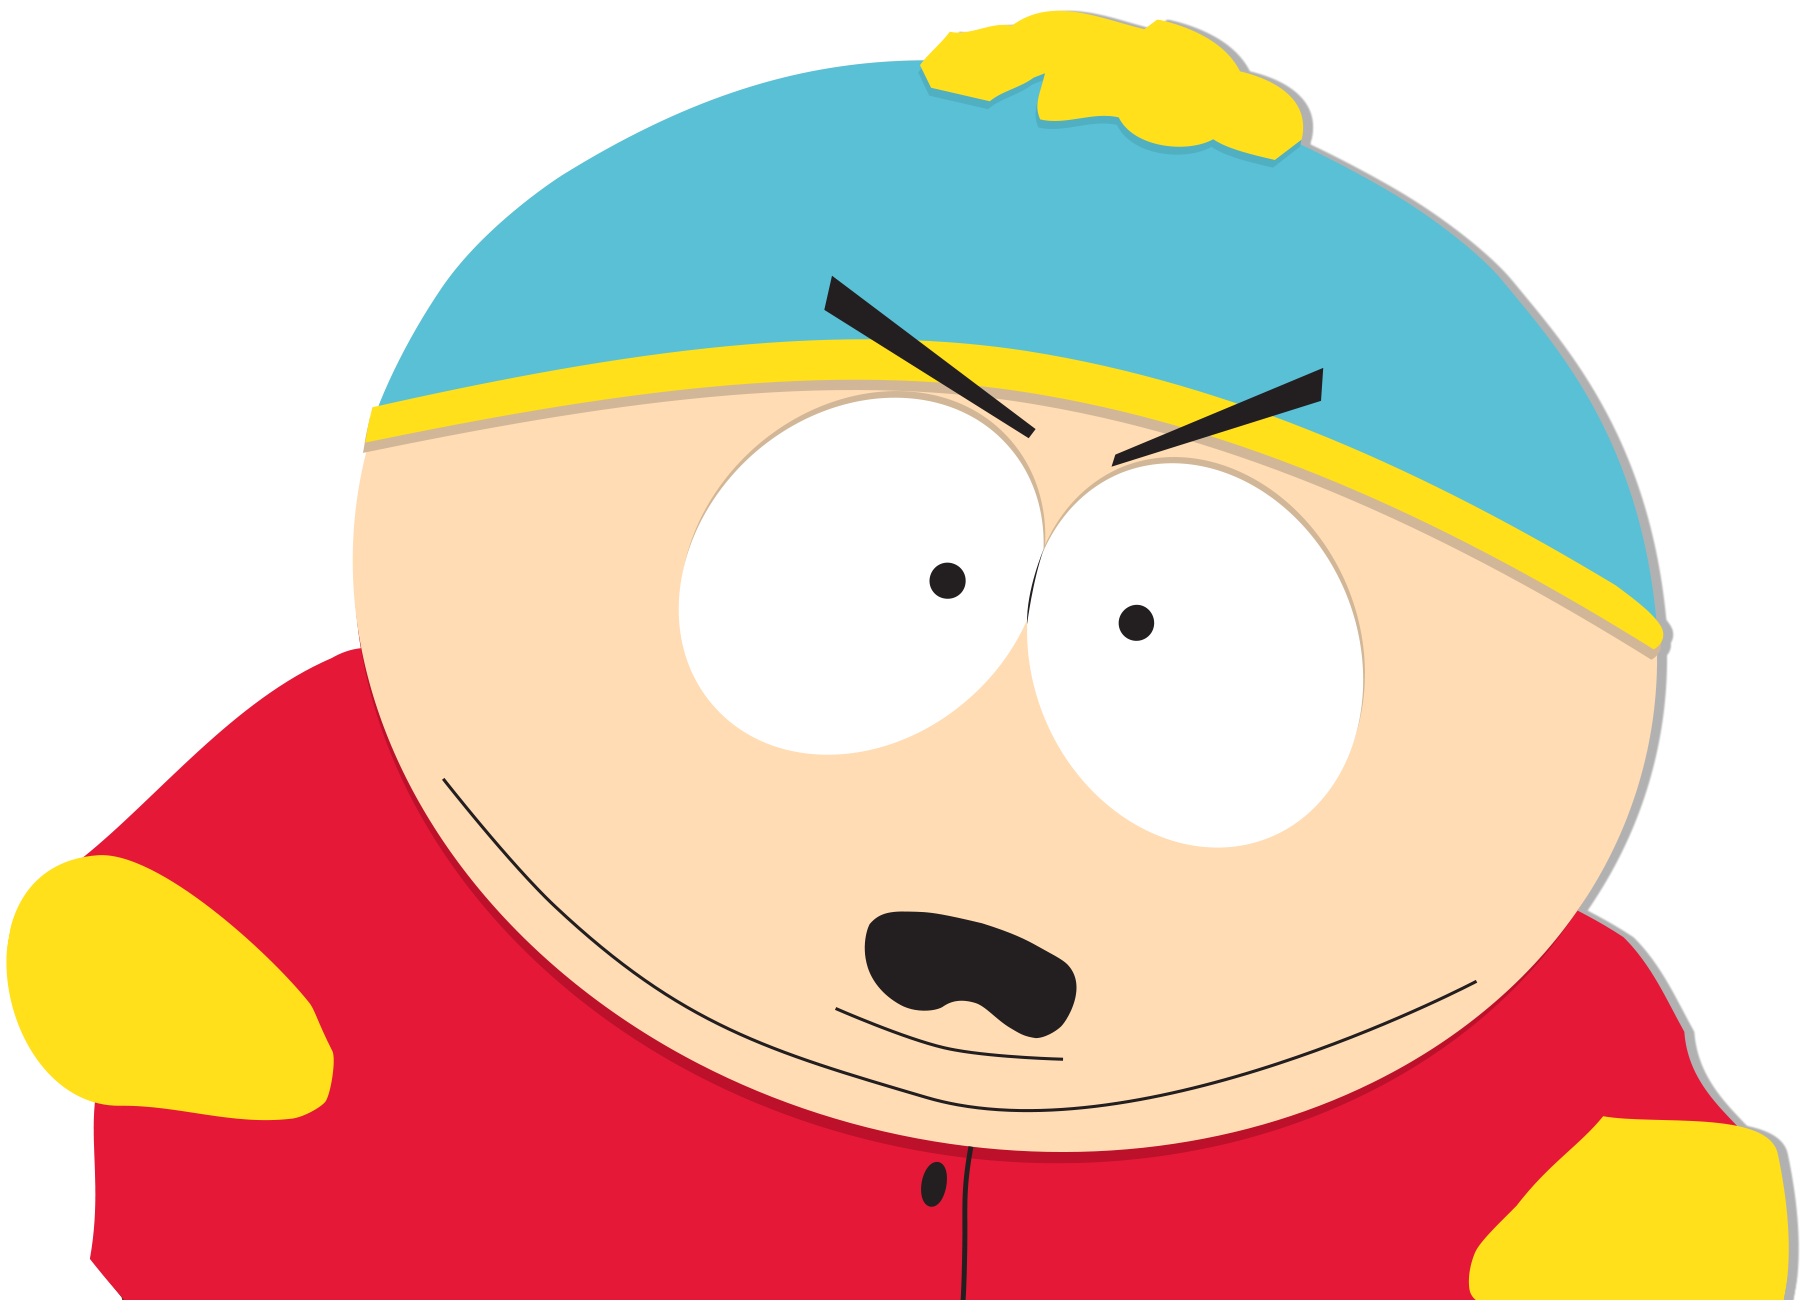 chee leong lee recommends pics of cartman from south park pic